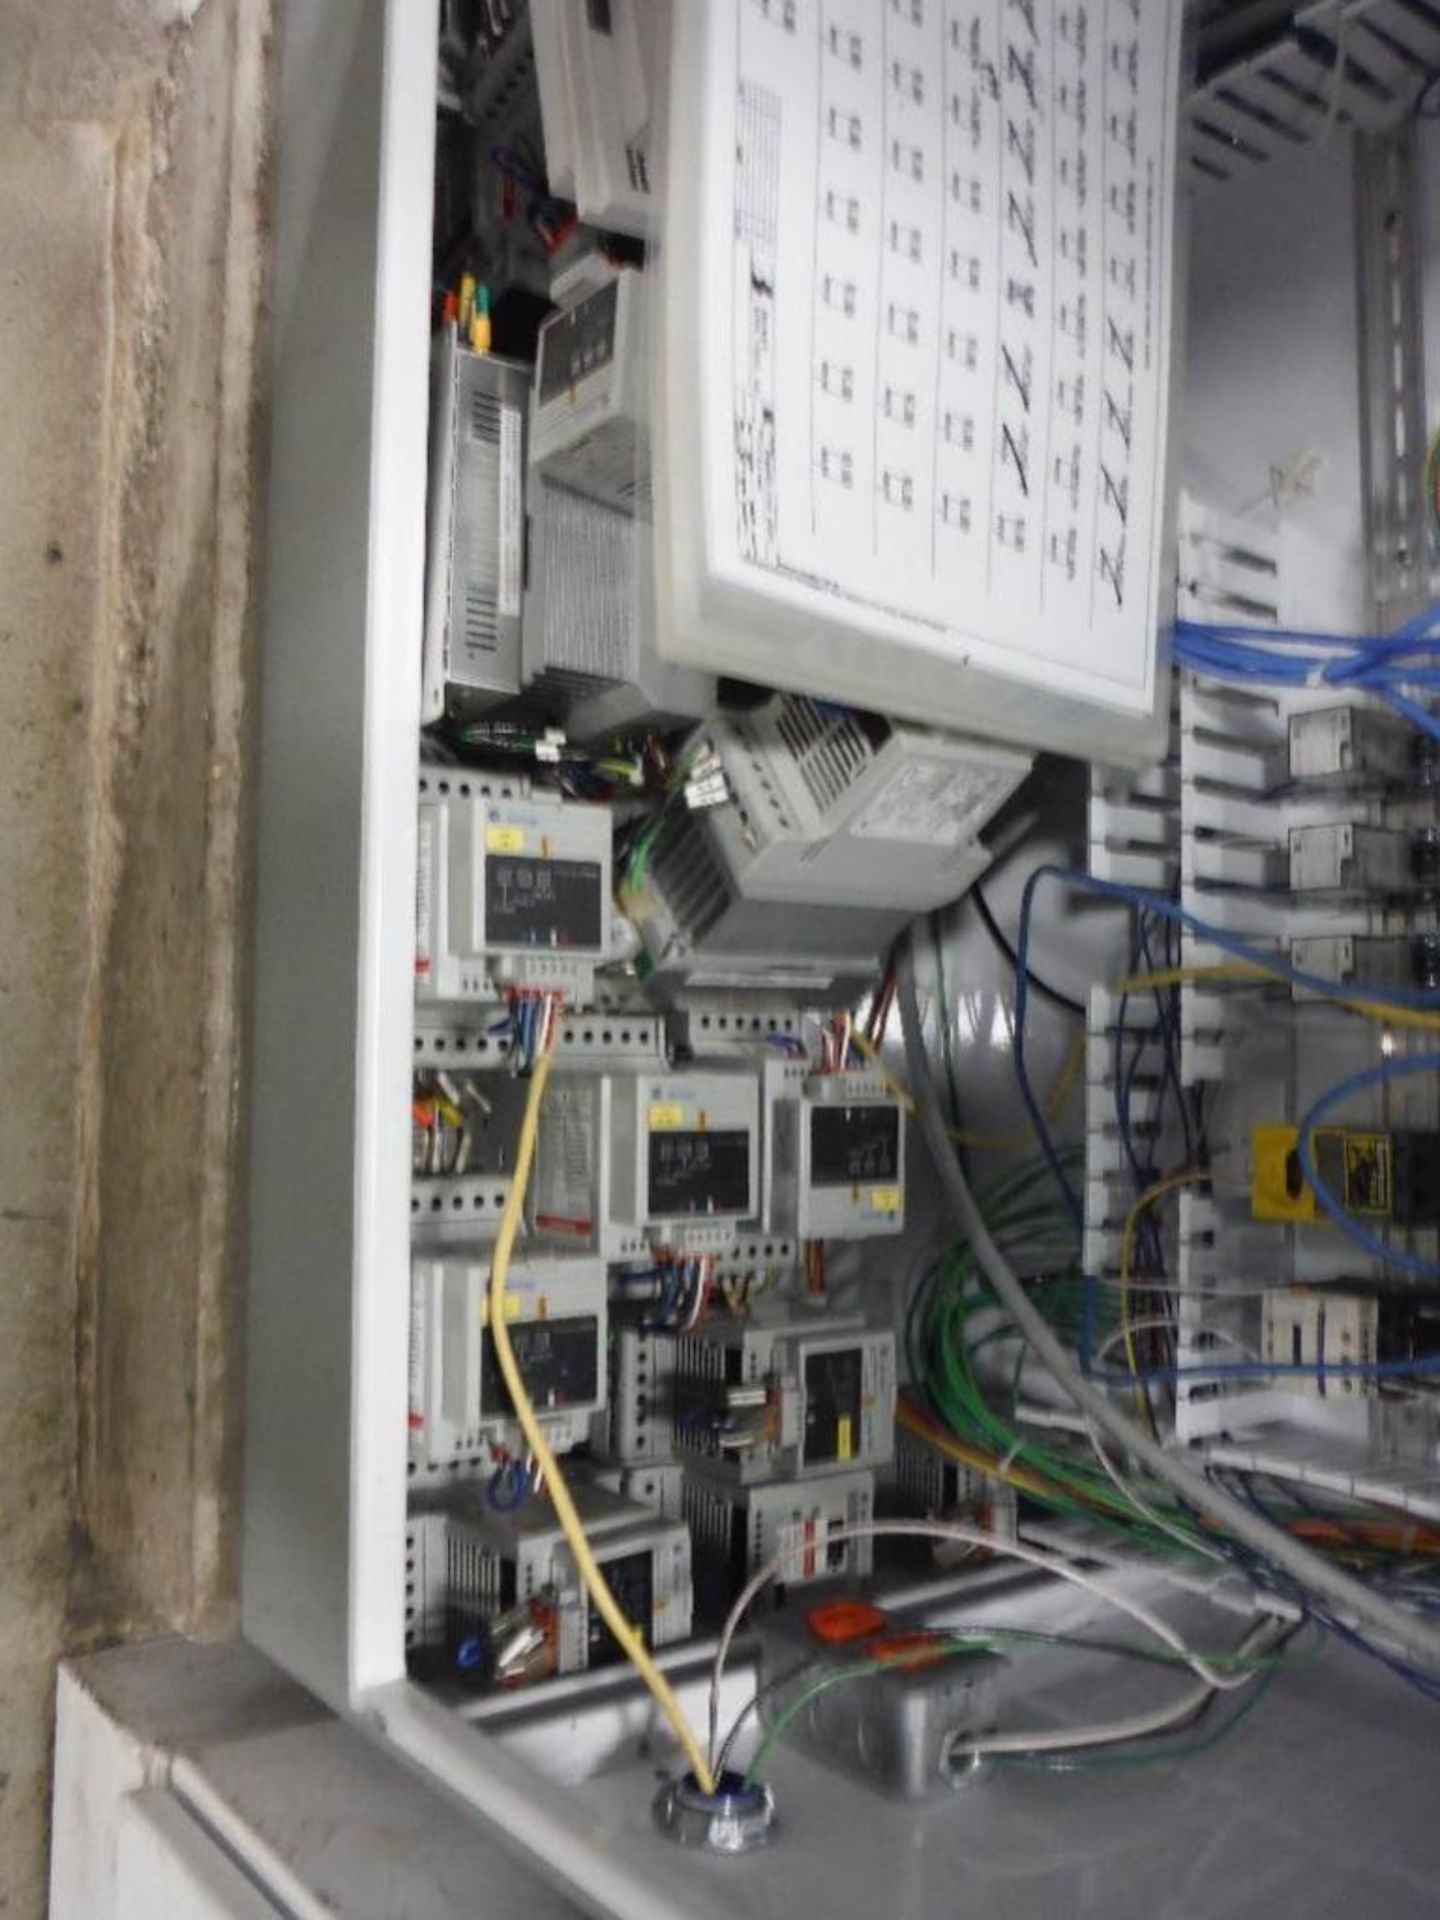 Steel control cabinet with Allen Bradley panelview 1000, (3) powerflex 40 vfds, plc - Rigging Fee: $ - Image 5 of 5